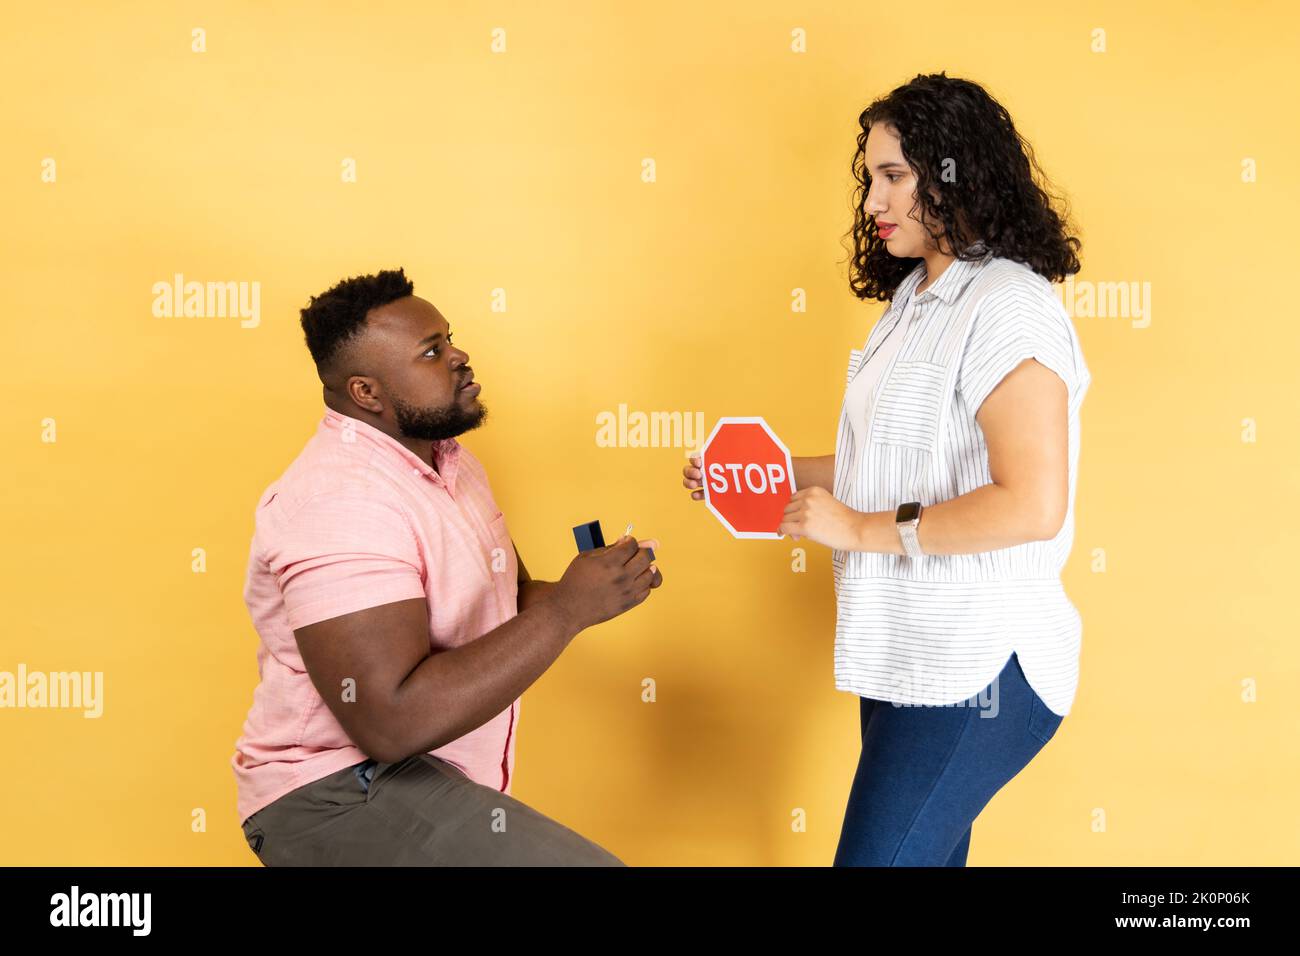 Portrait of young couple in casual clothing standing together, man making proposal to his girlfriend, woman showing red stop sign to him, refusing. Indoor studio shot isolated on yellow background. Stock Photo